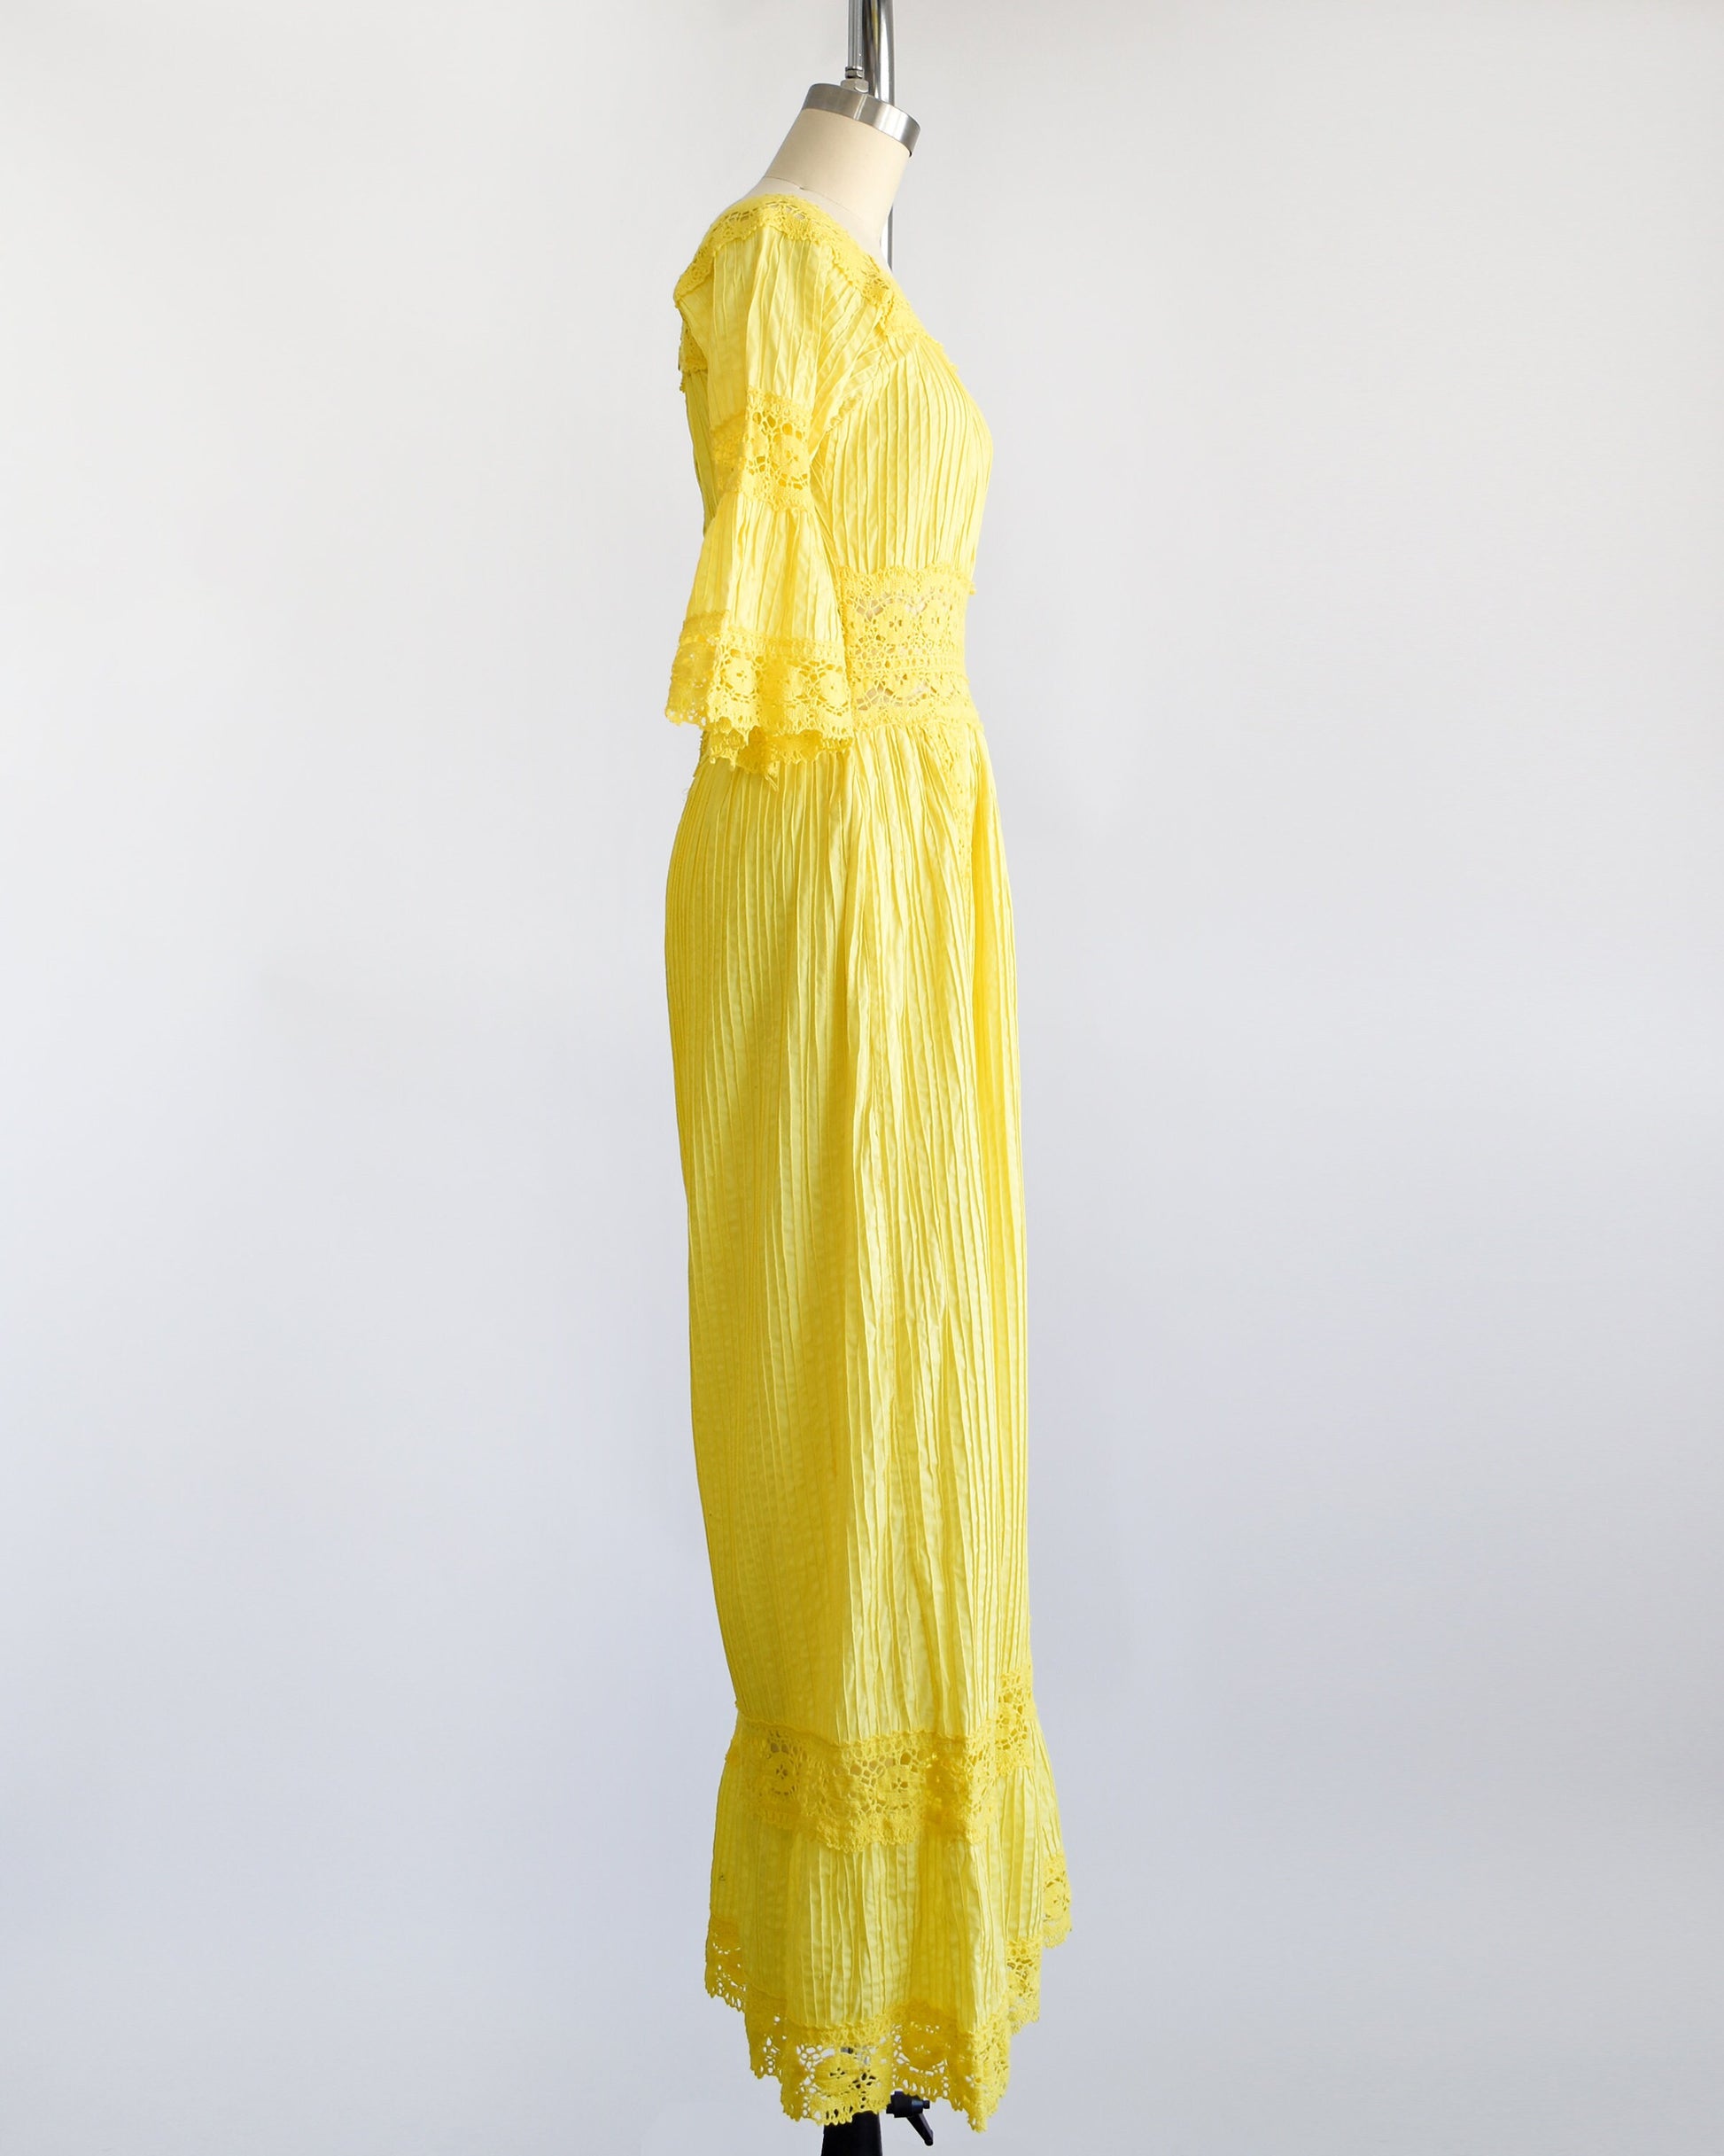 Side view of a vintage 70s yellow maxi dress with pin tuck pleats, along with lace trim around the collar, bell sleeves, waist, down the front, and around the hem. The dress is on a dress form.